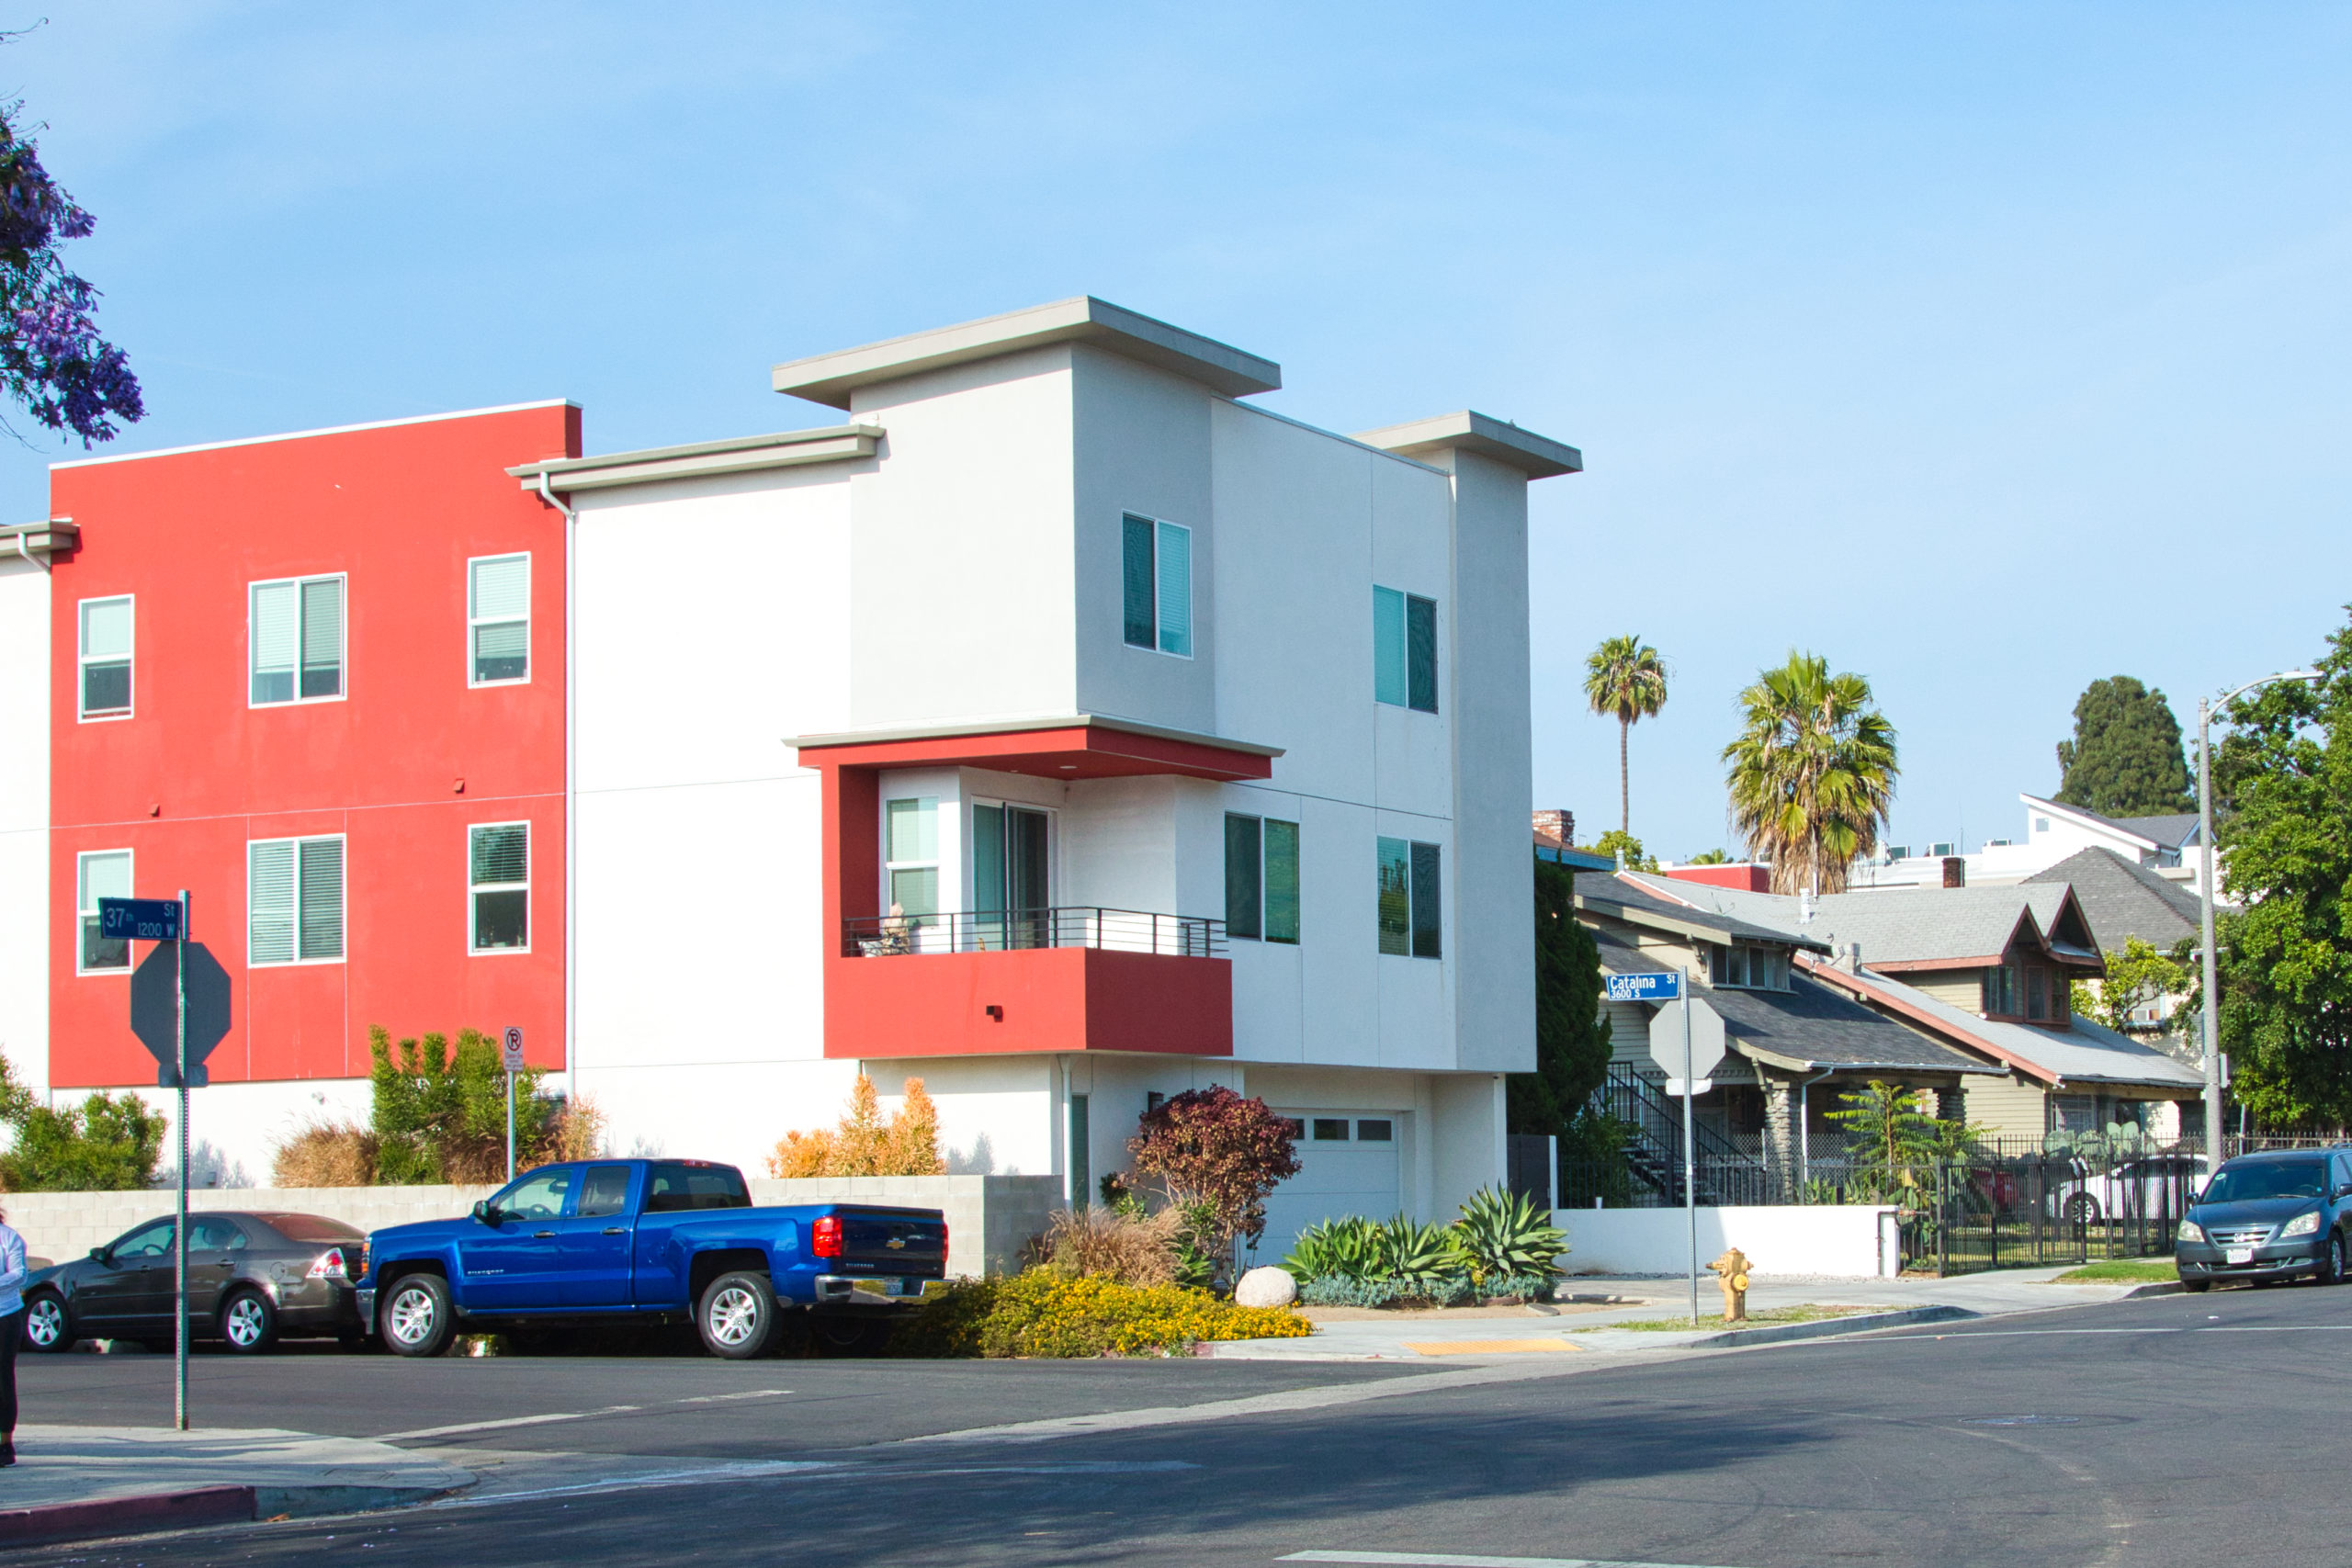 Streamlining Affordable Housing Production Is Important, but So Is Protecting Renters